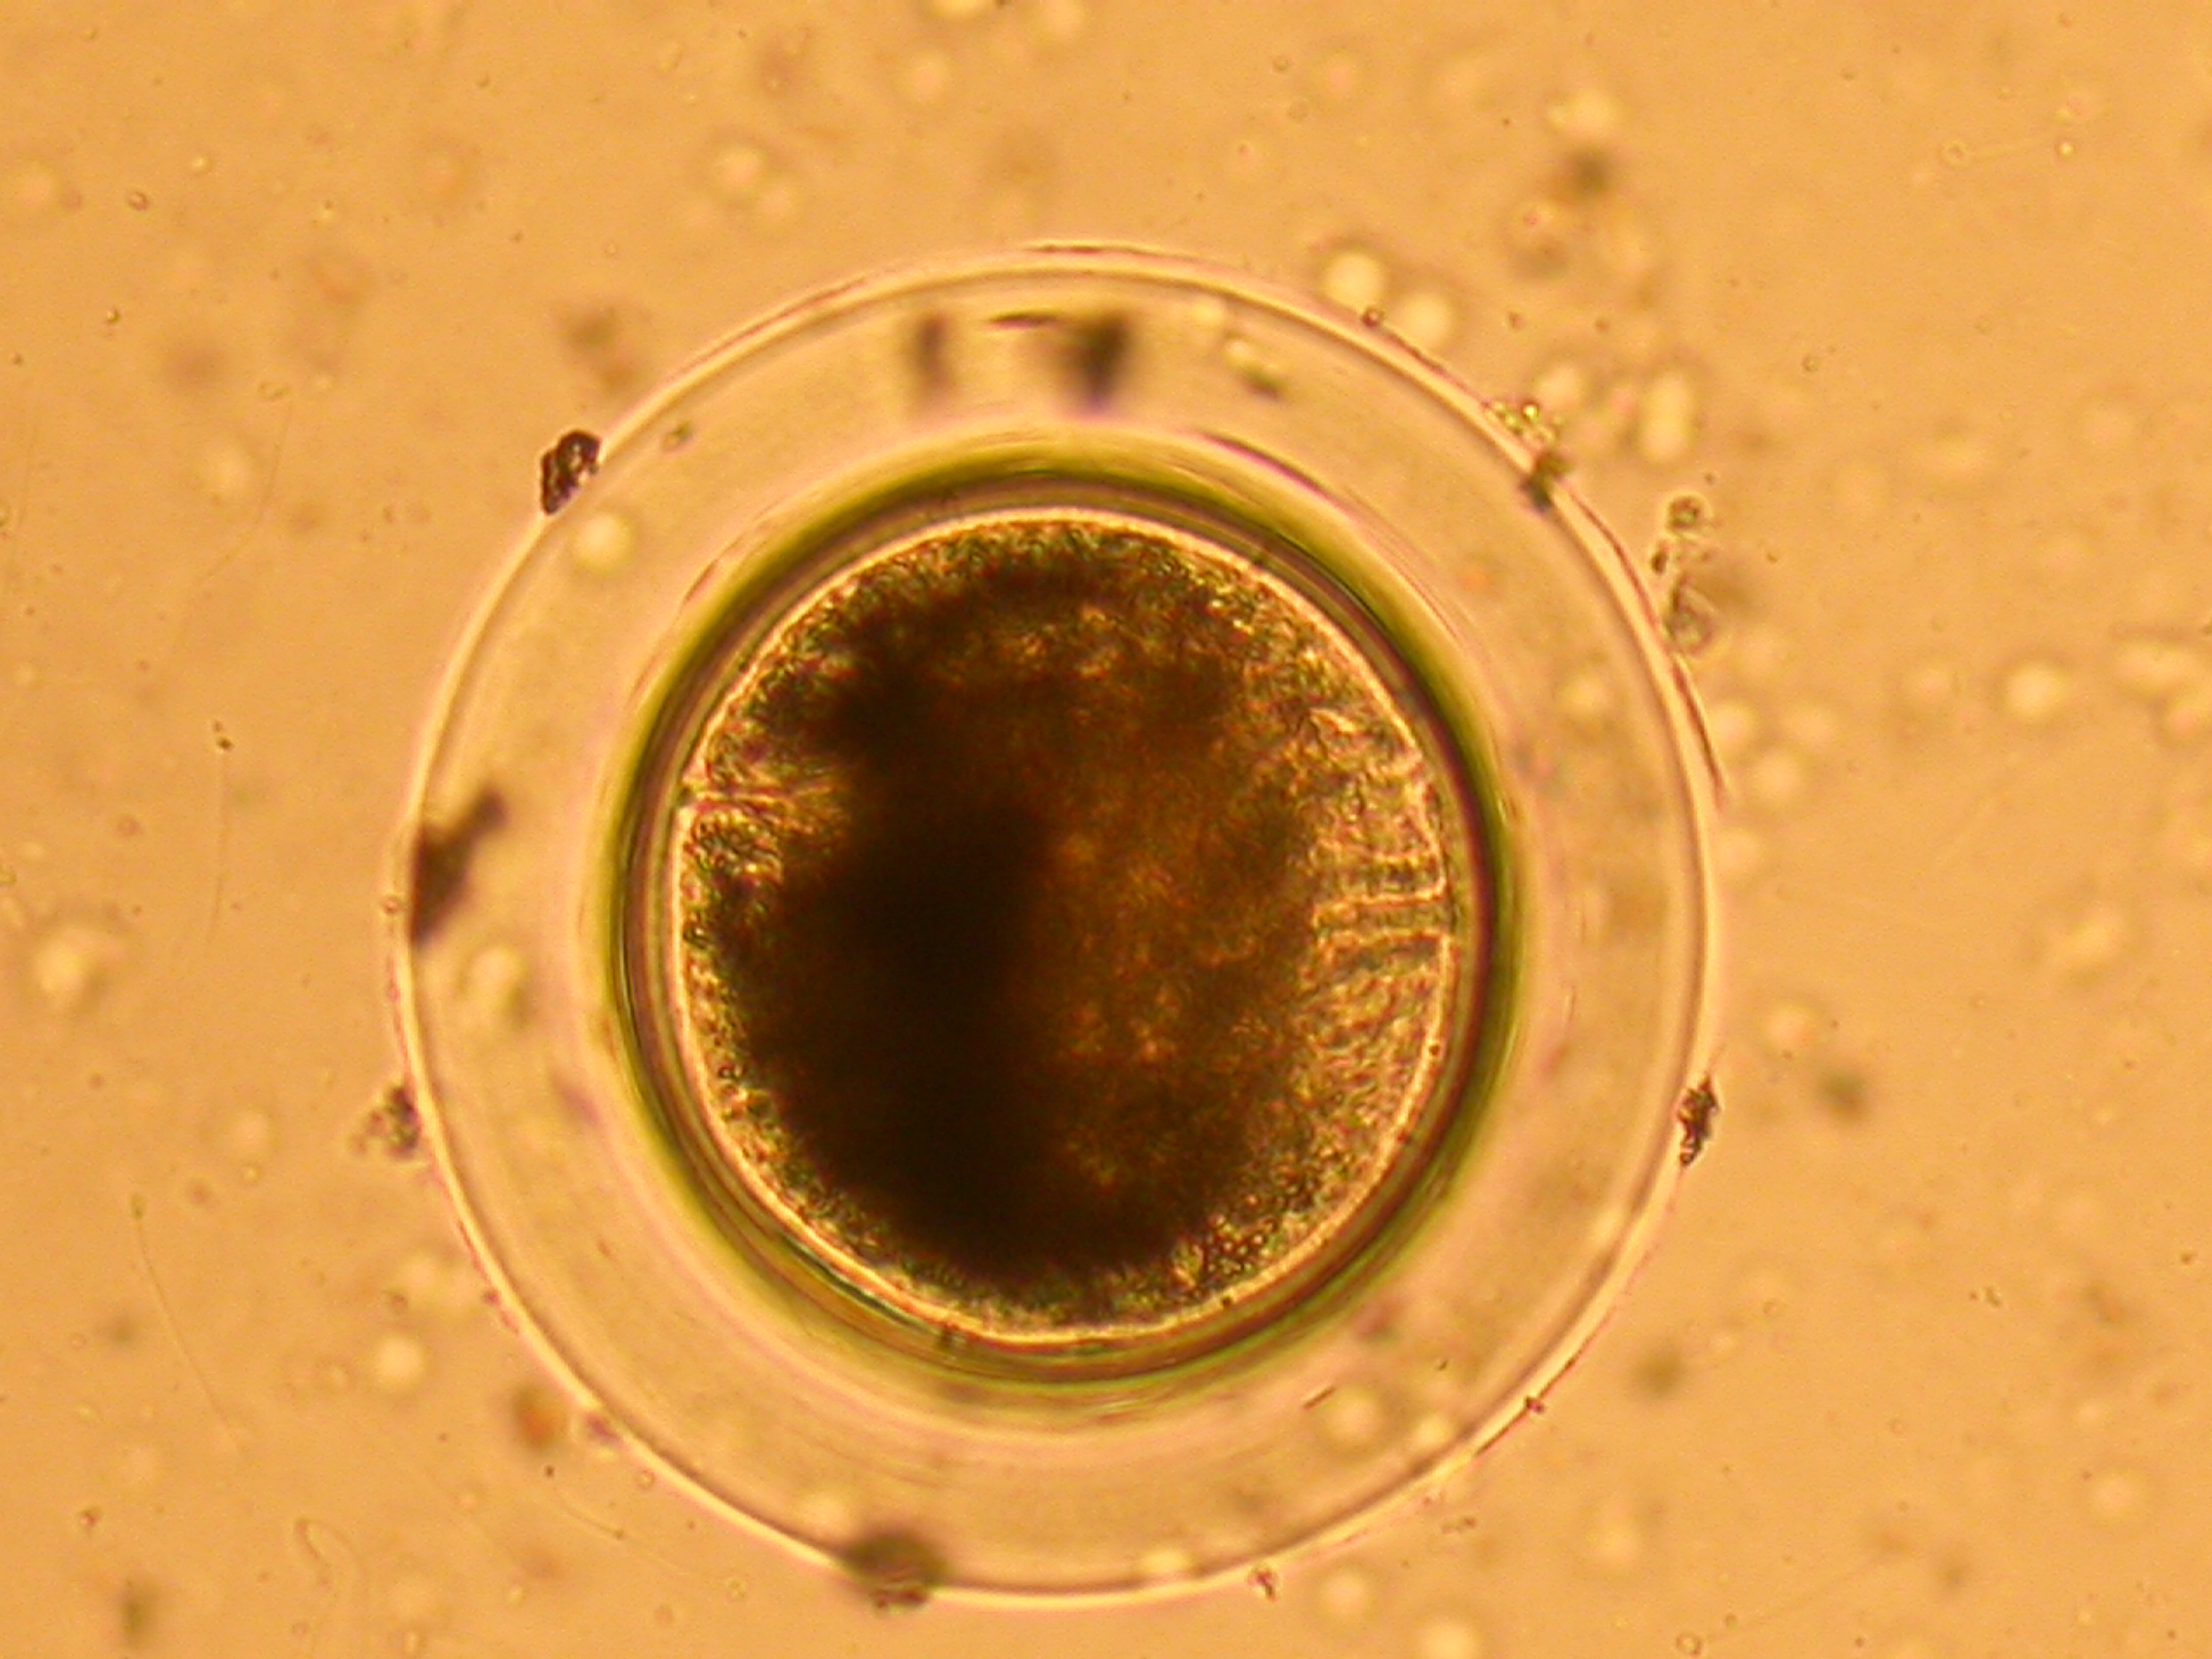 microscope picture of a single-celled organism that looks like an egg.